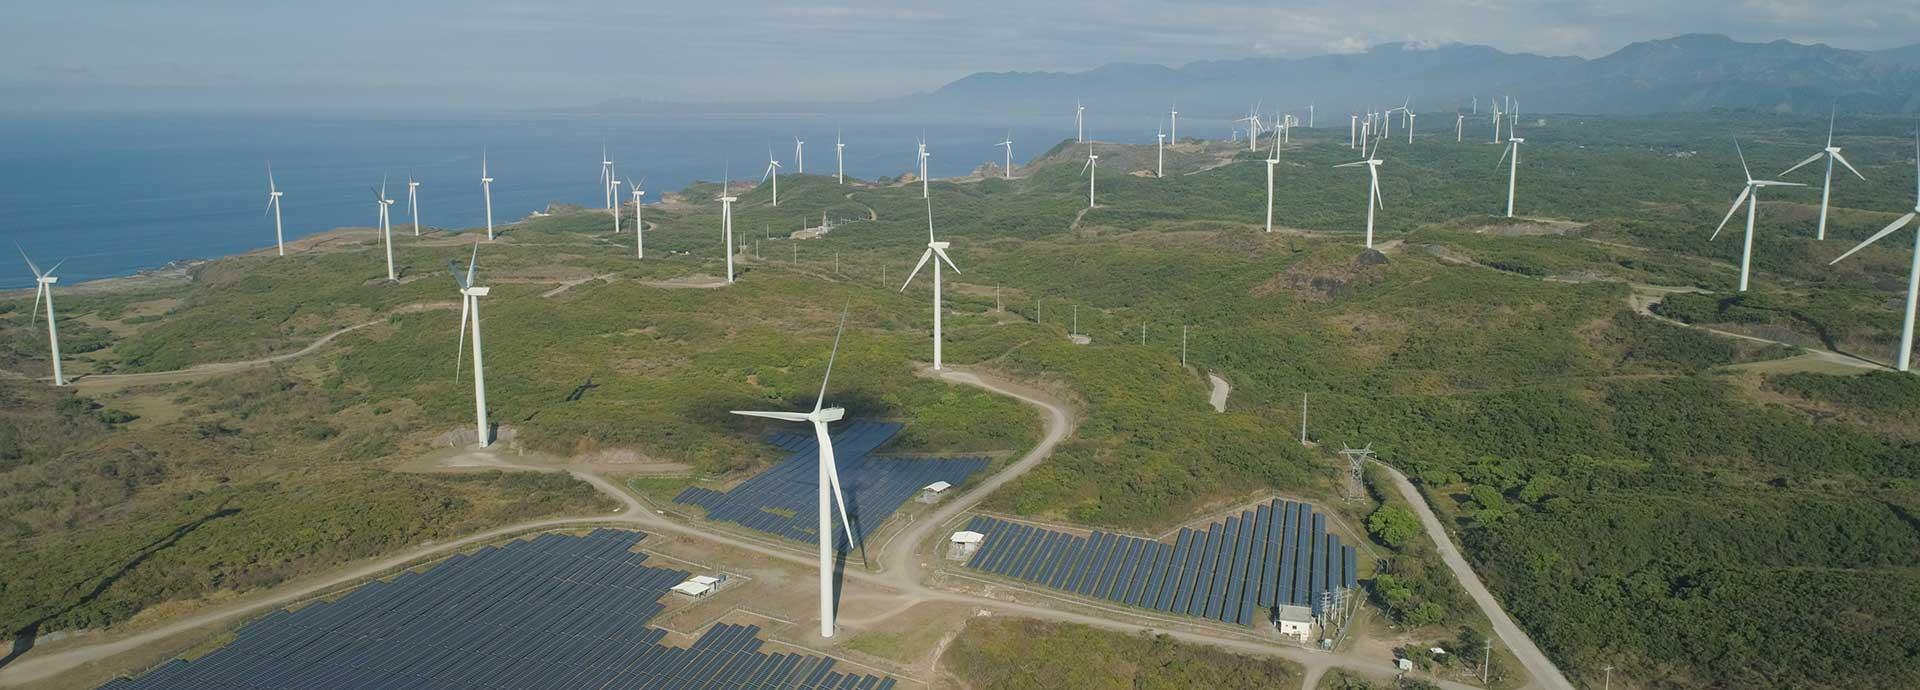 The Philippines’ outreach for renewable energy